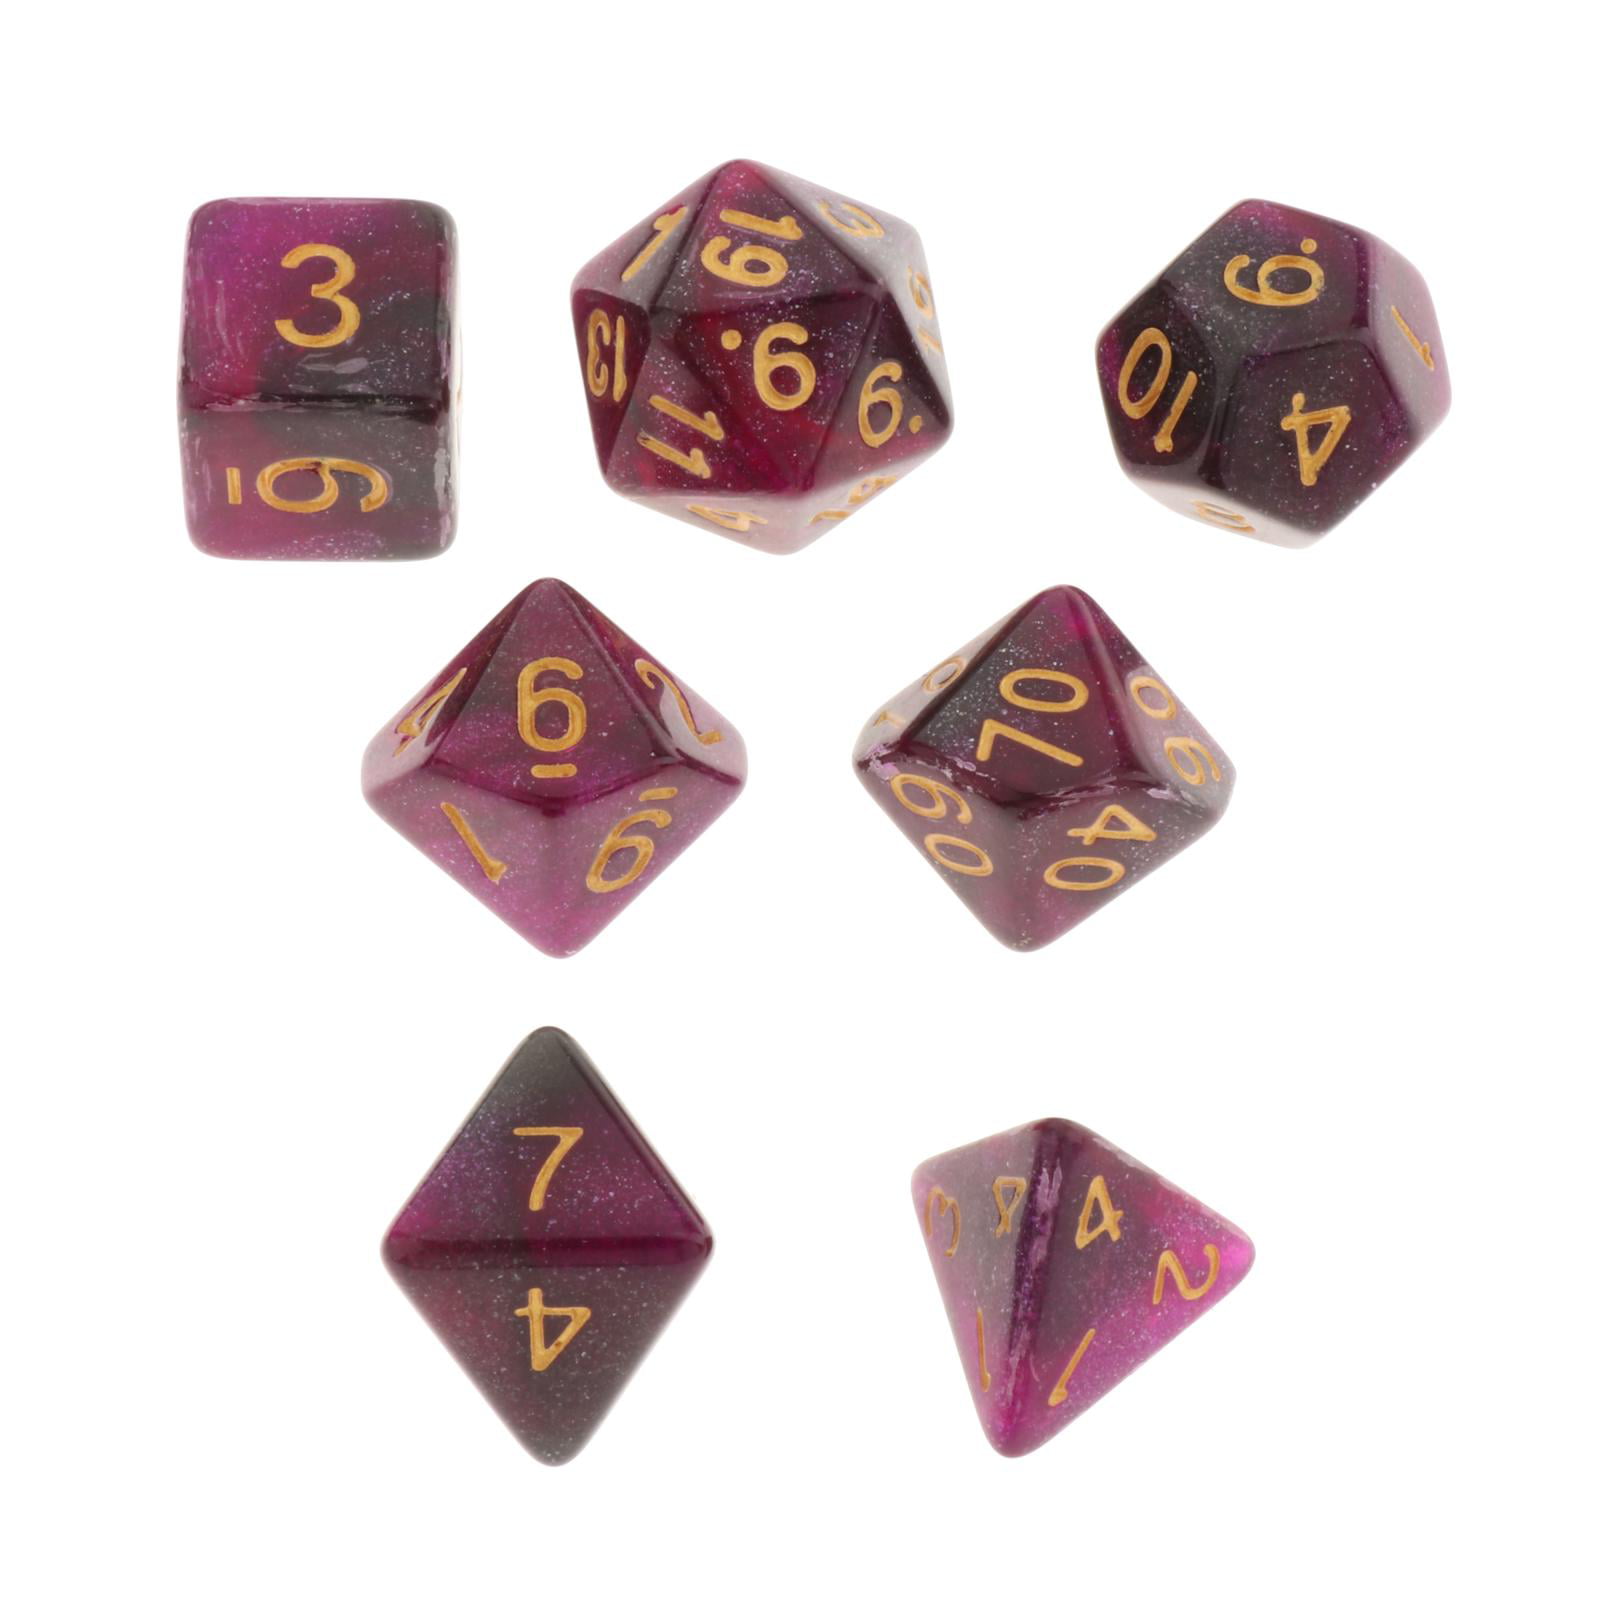 New RPG D&D DND Poly Dice Board Game set of 10 sided die D10 Purple+Gray 